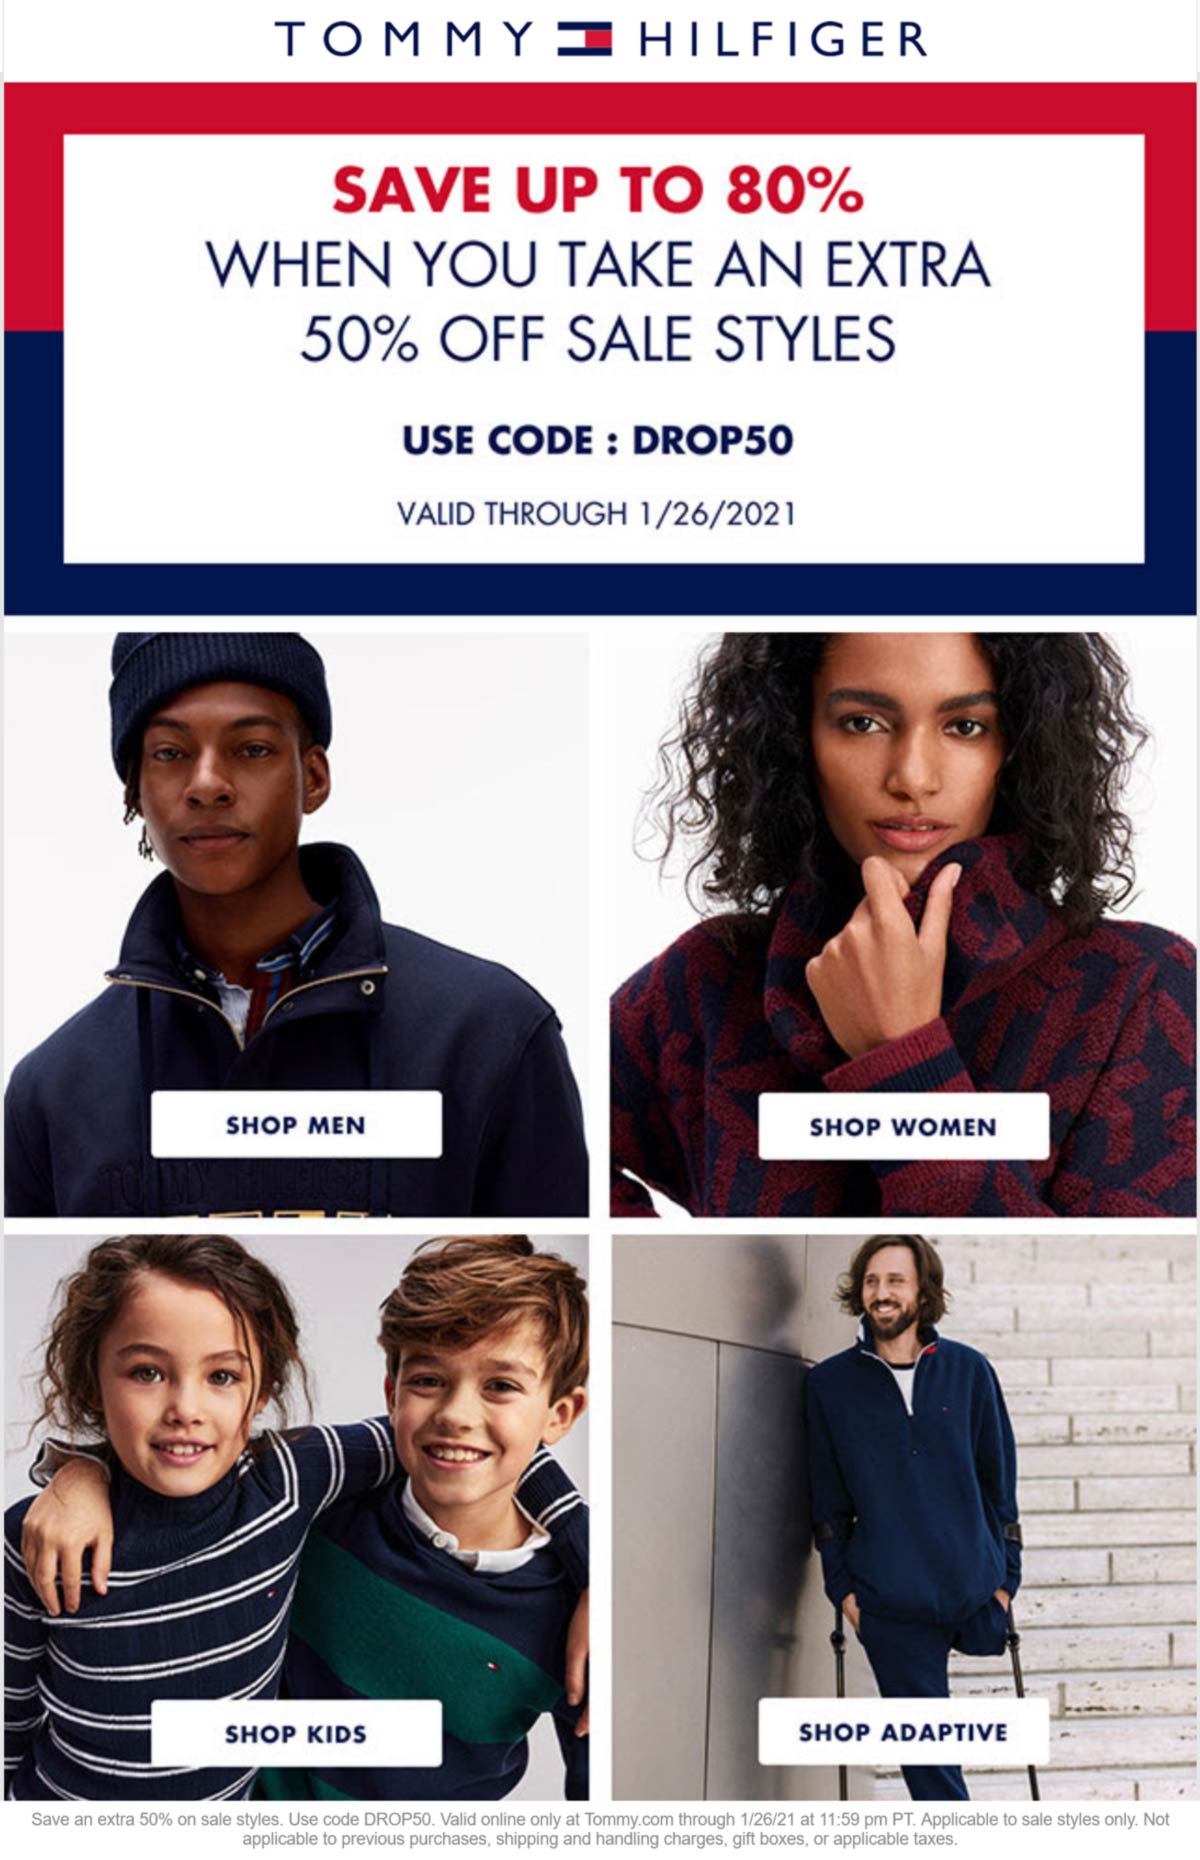 Tommy Hilfiger stores Coupon  Extra 50% off sale styles at Tommy Hilfiger via promo code DROP50 #tommyhilfiger 